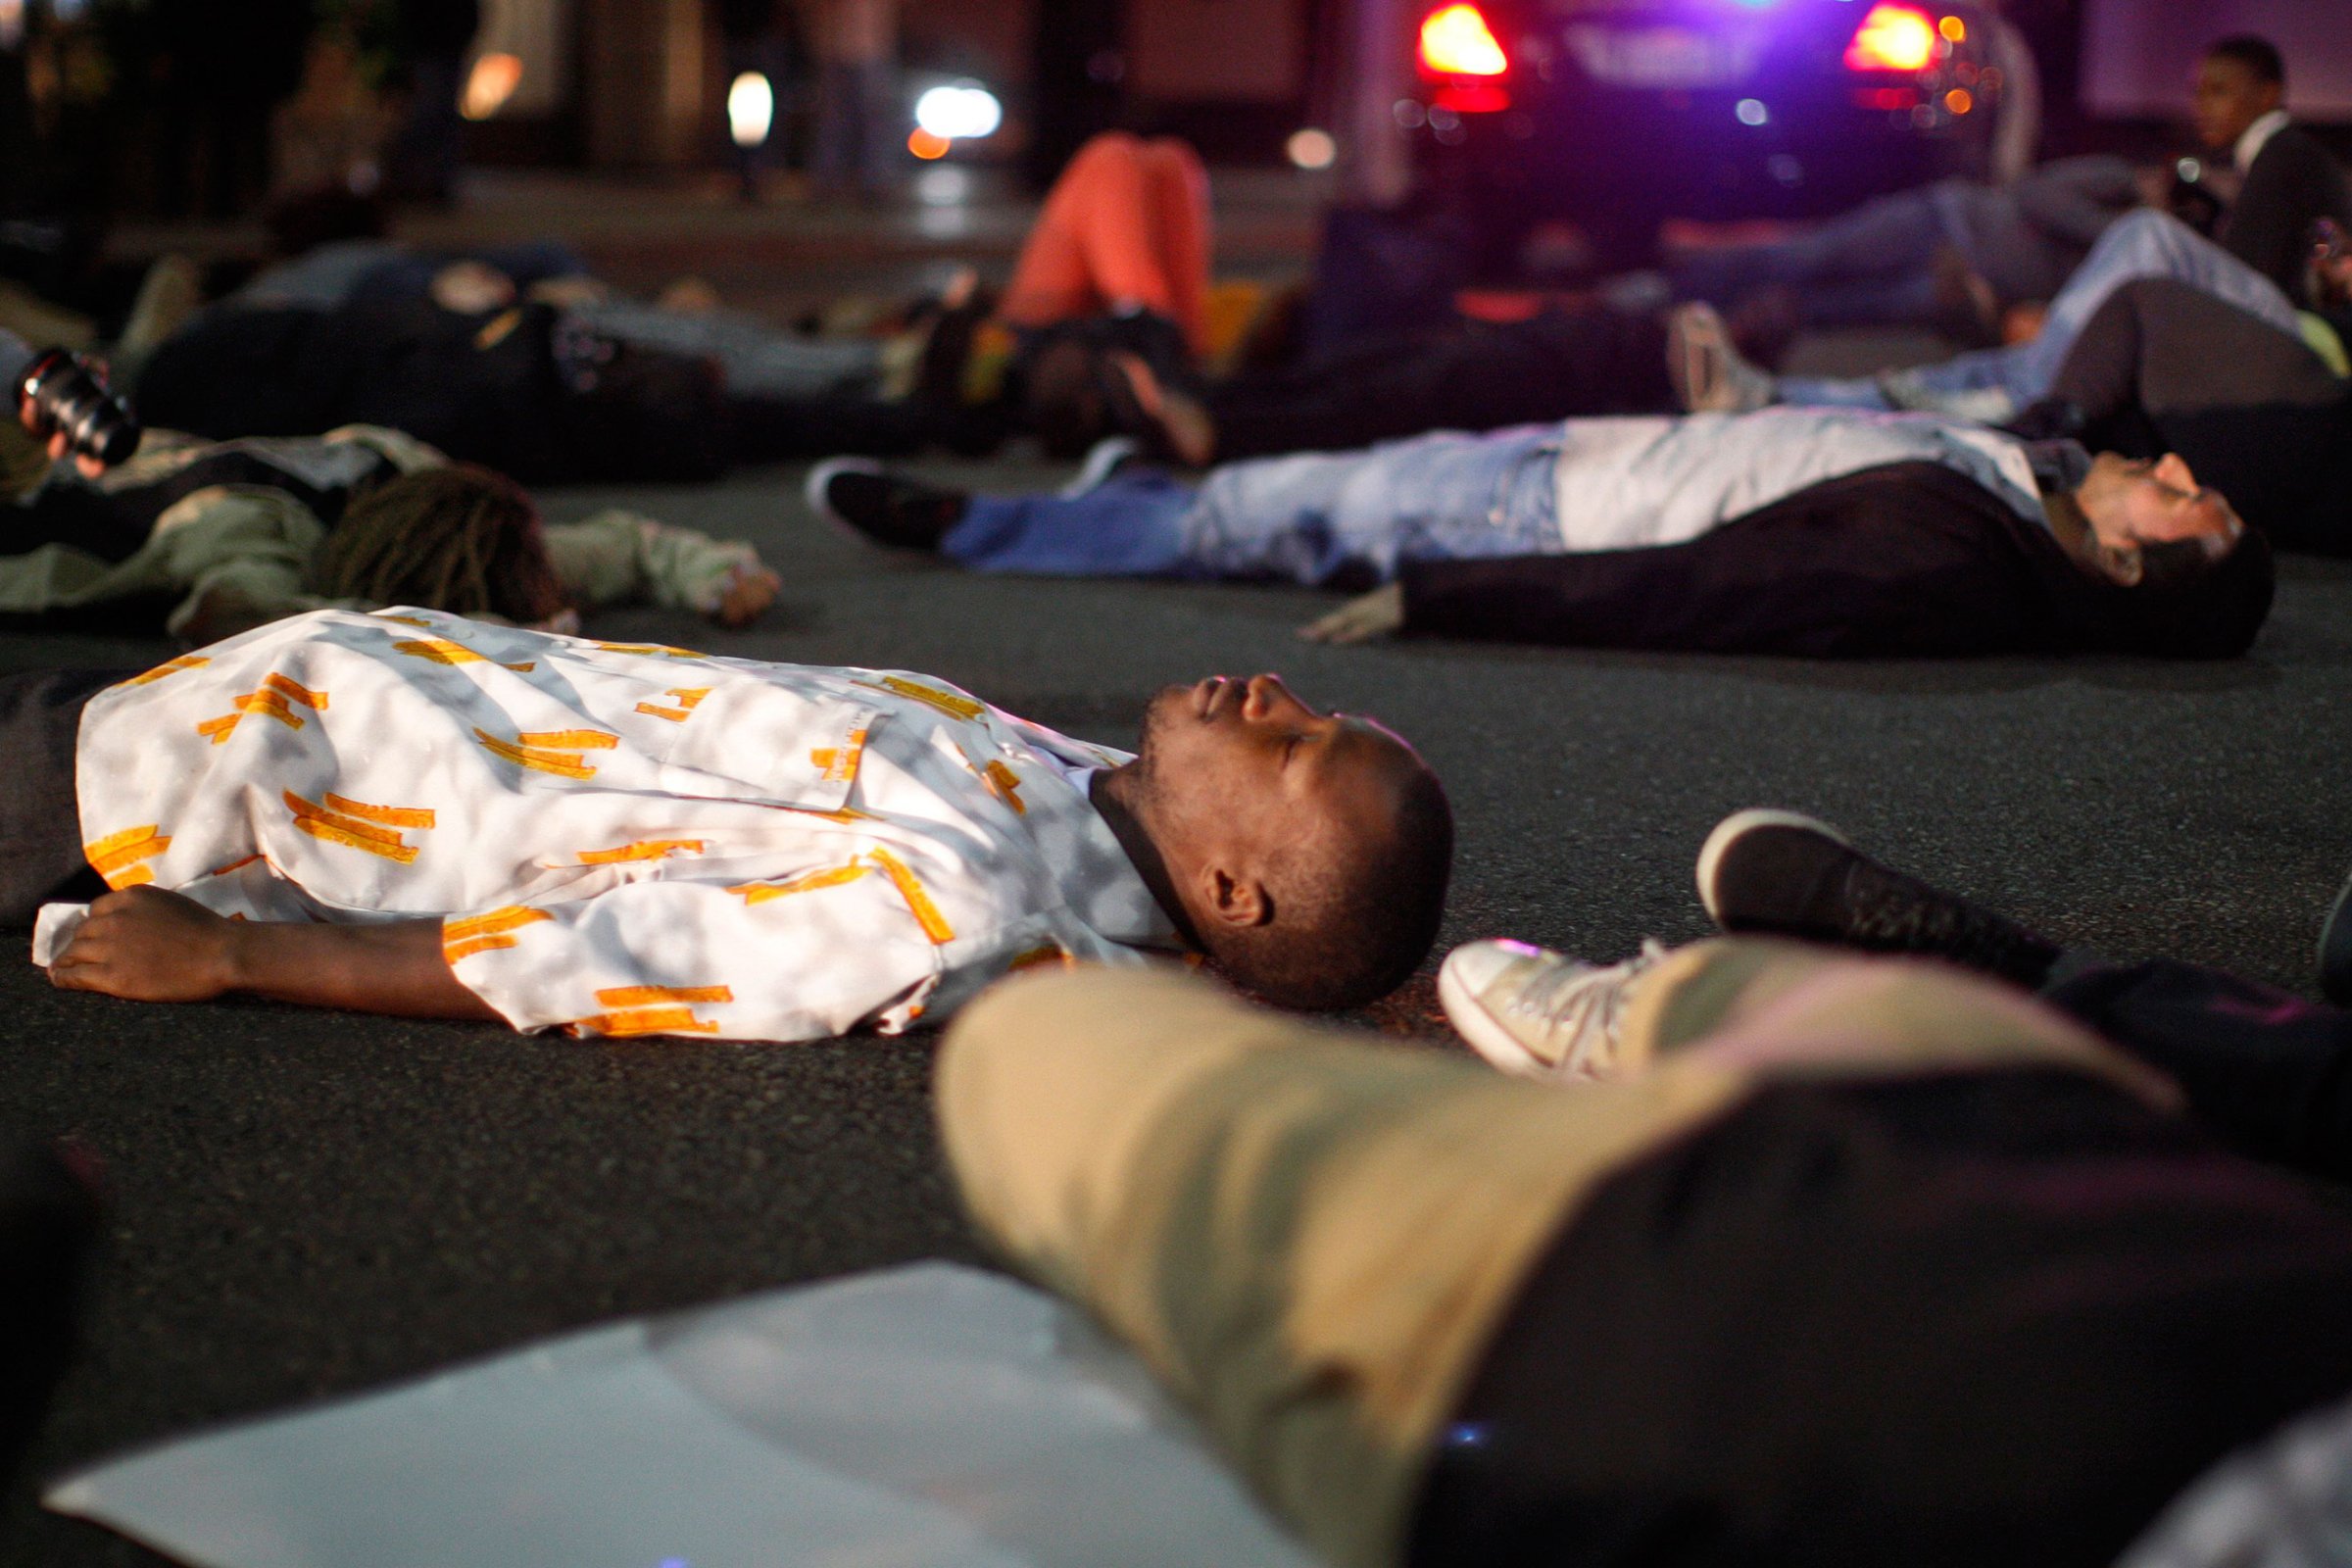 Protesters lay down to block traffic in the intersection of Wilshire Boulevard and Rodeo Dr. in Beverly Hills, Calif., on Nov. 24, 2014.